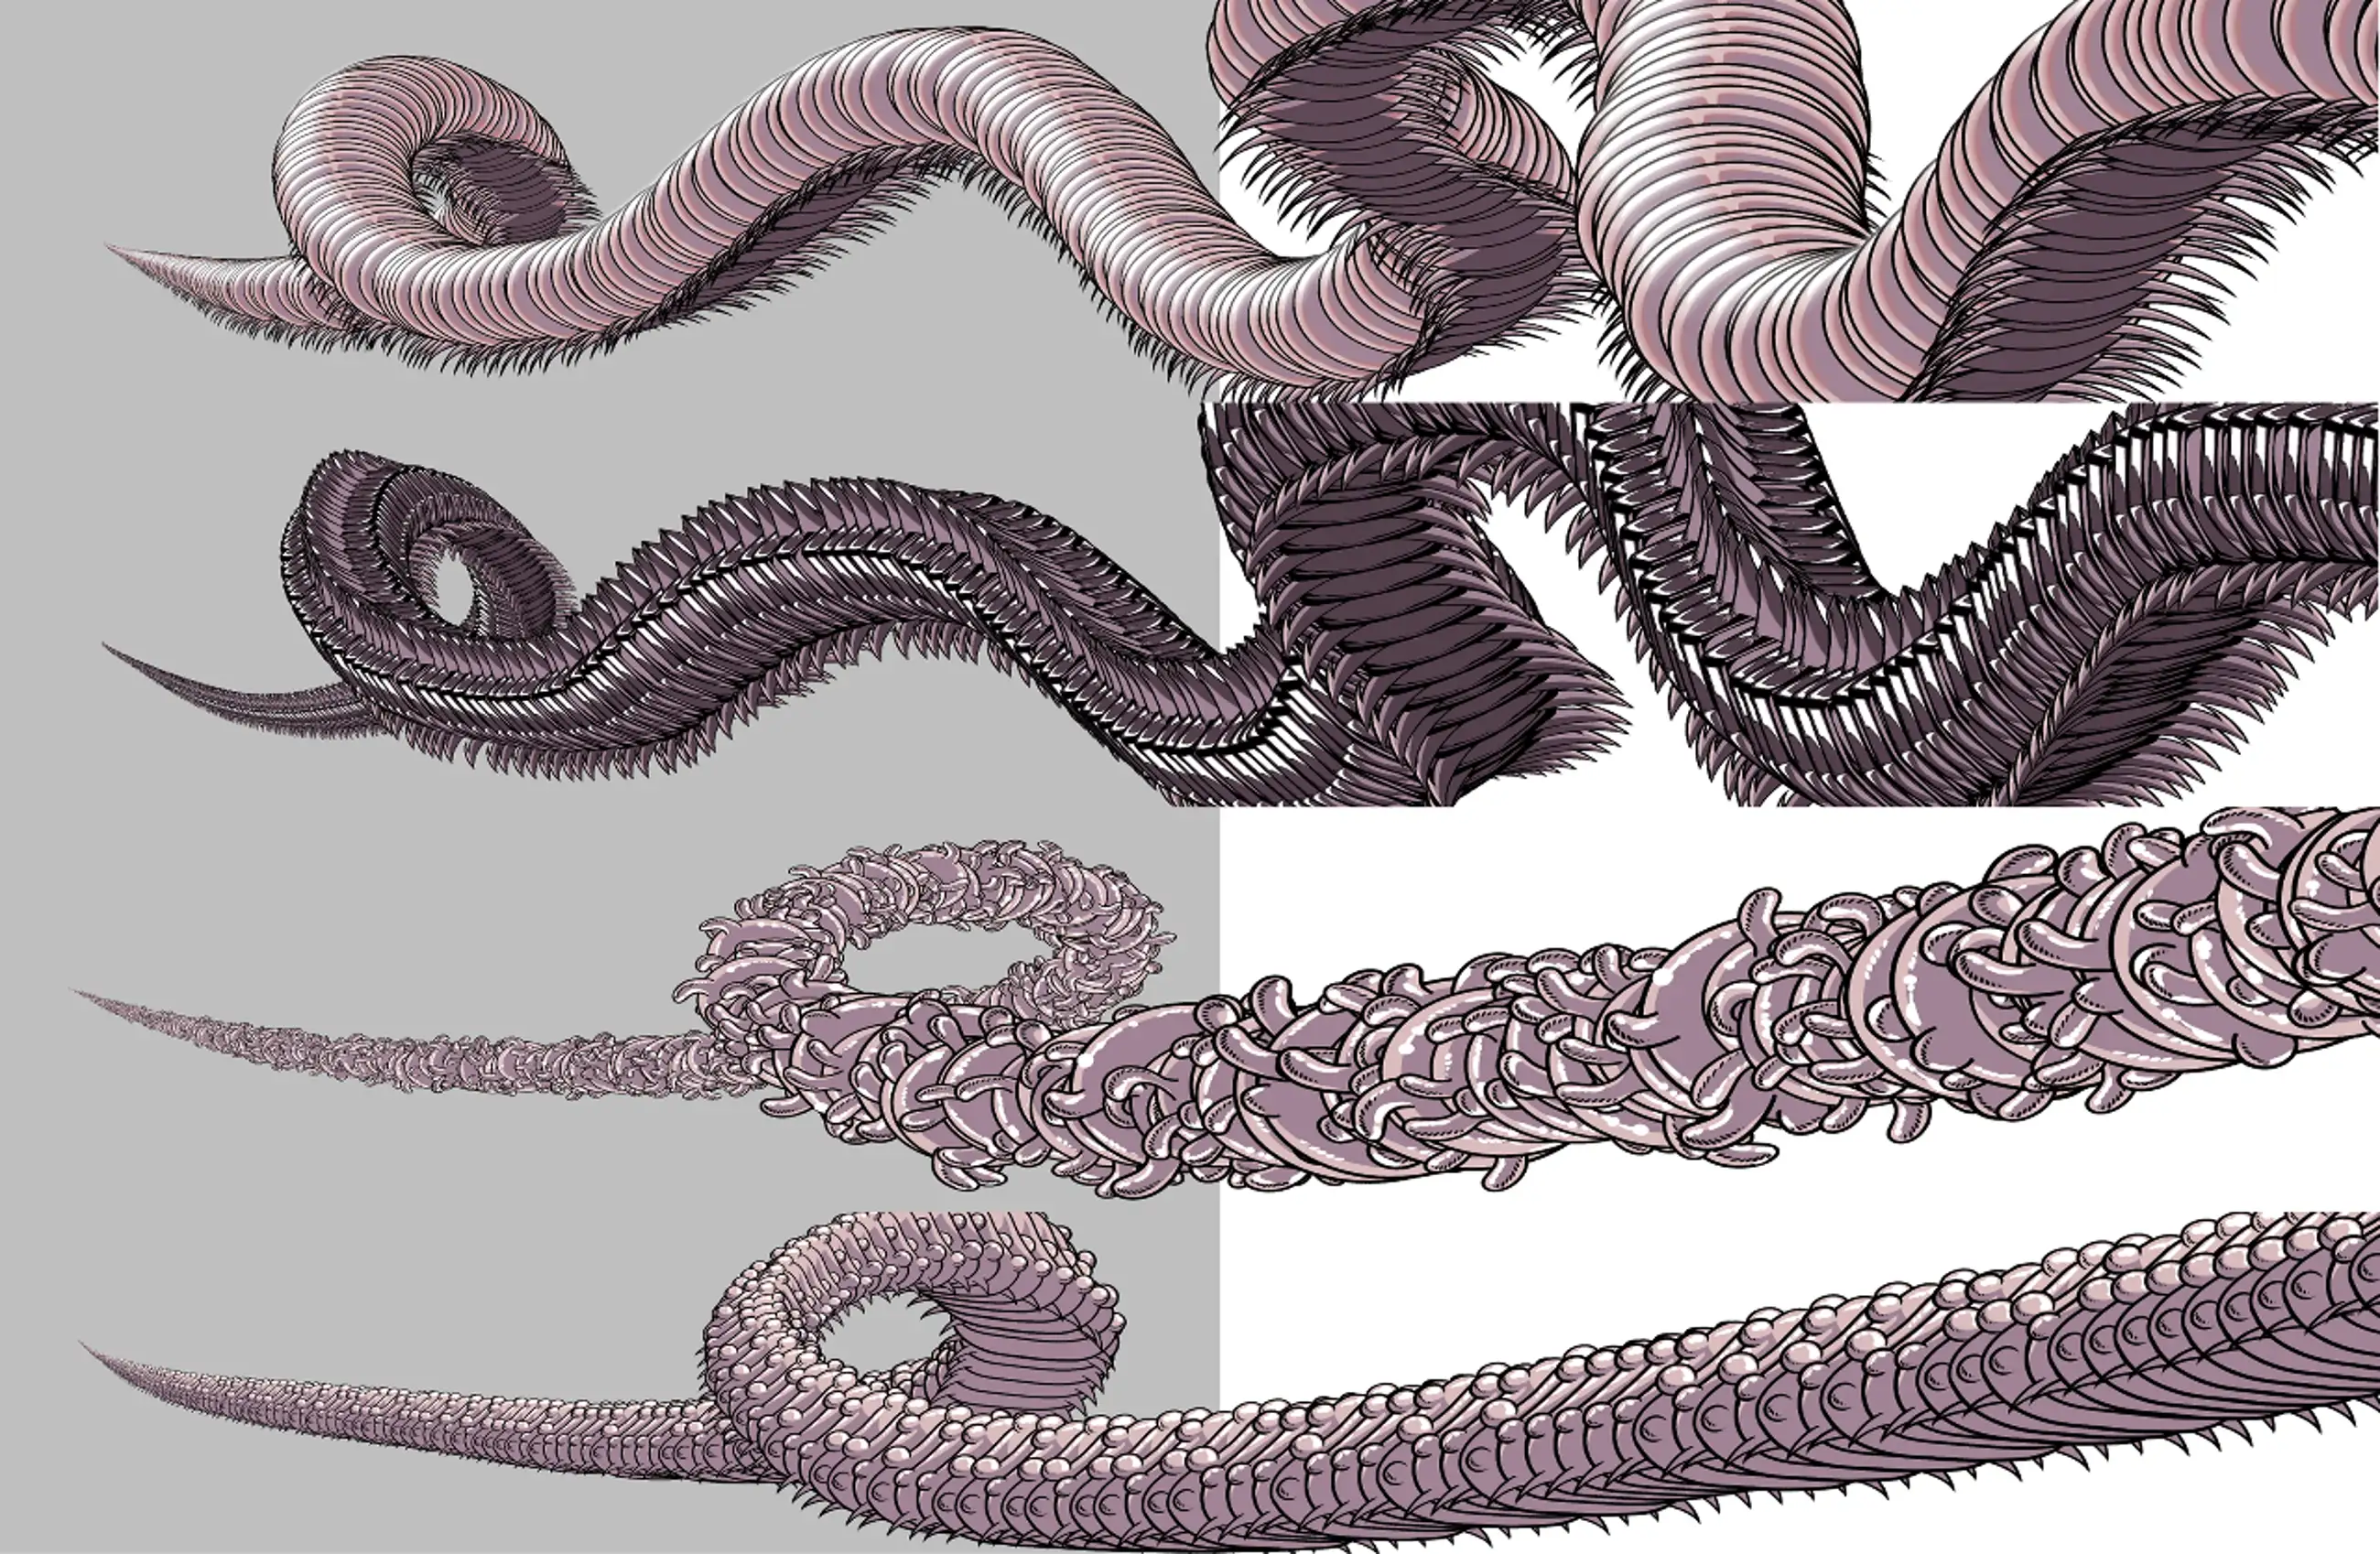 Collection of tentacle & monster creative brushes!